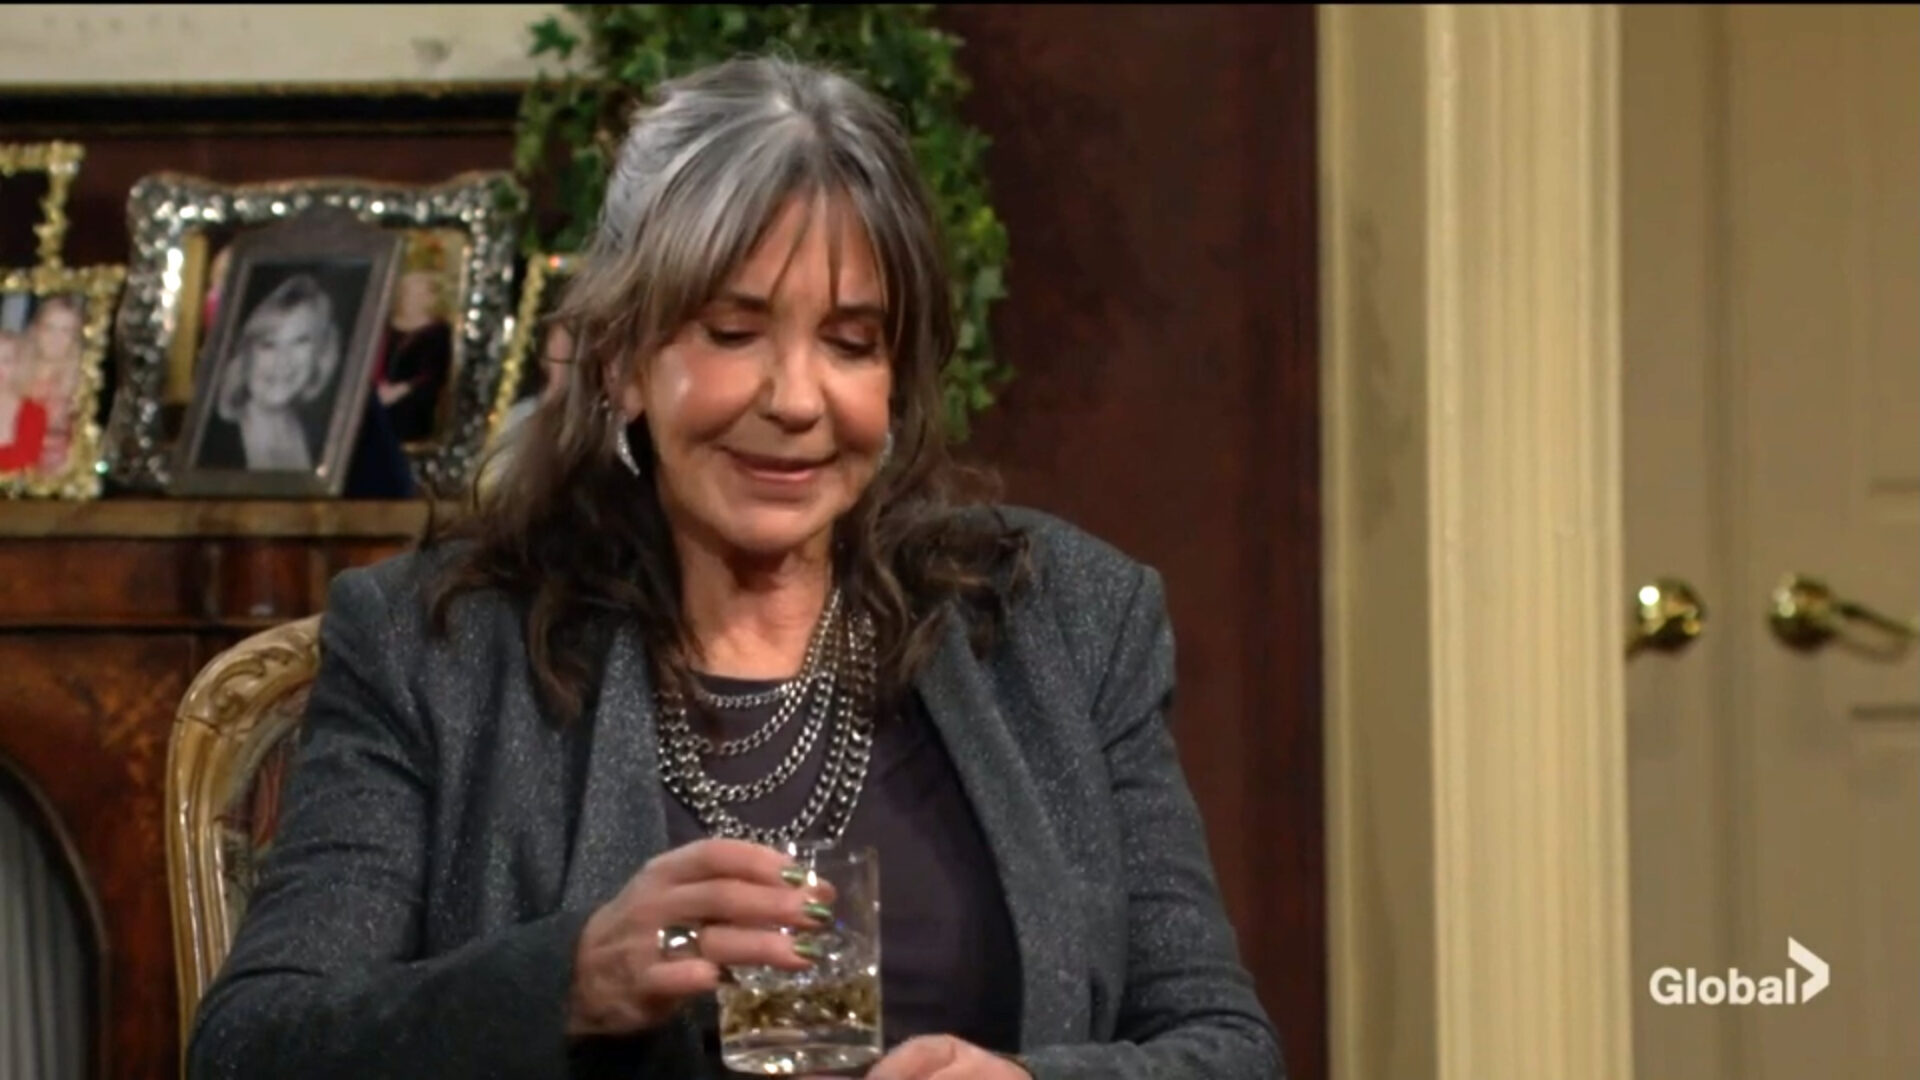 Jill drinks and says she'd rather work with Mamie.